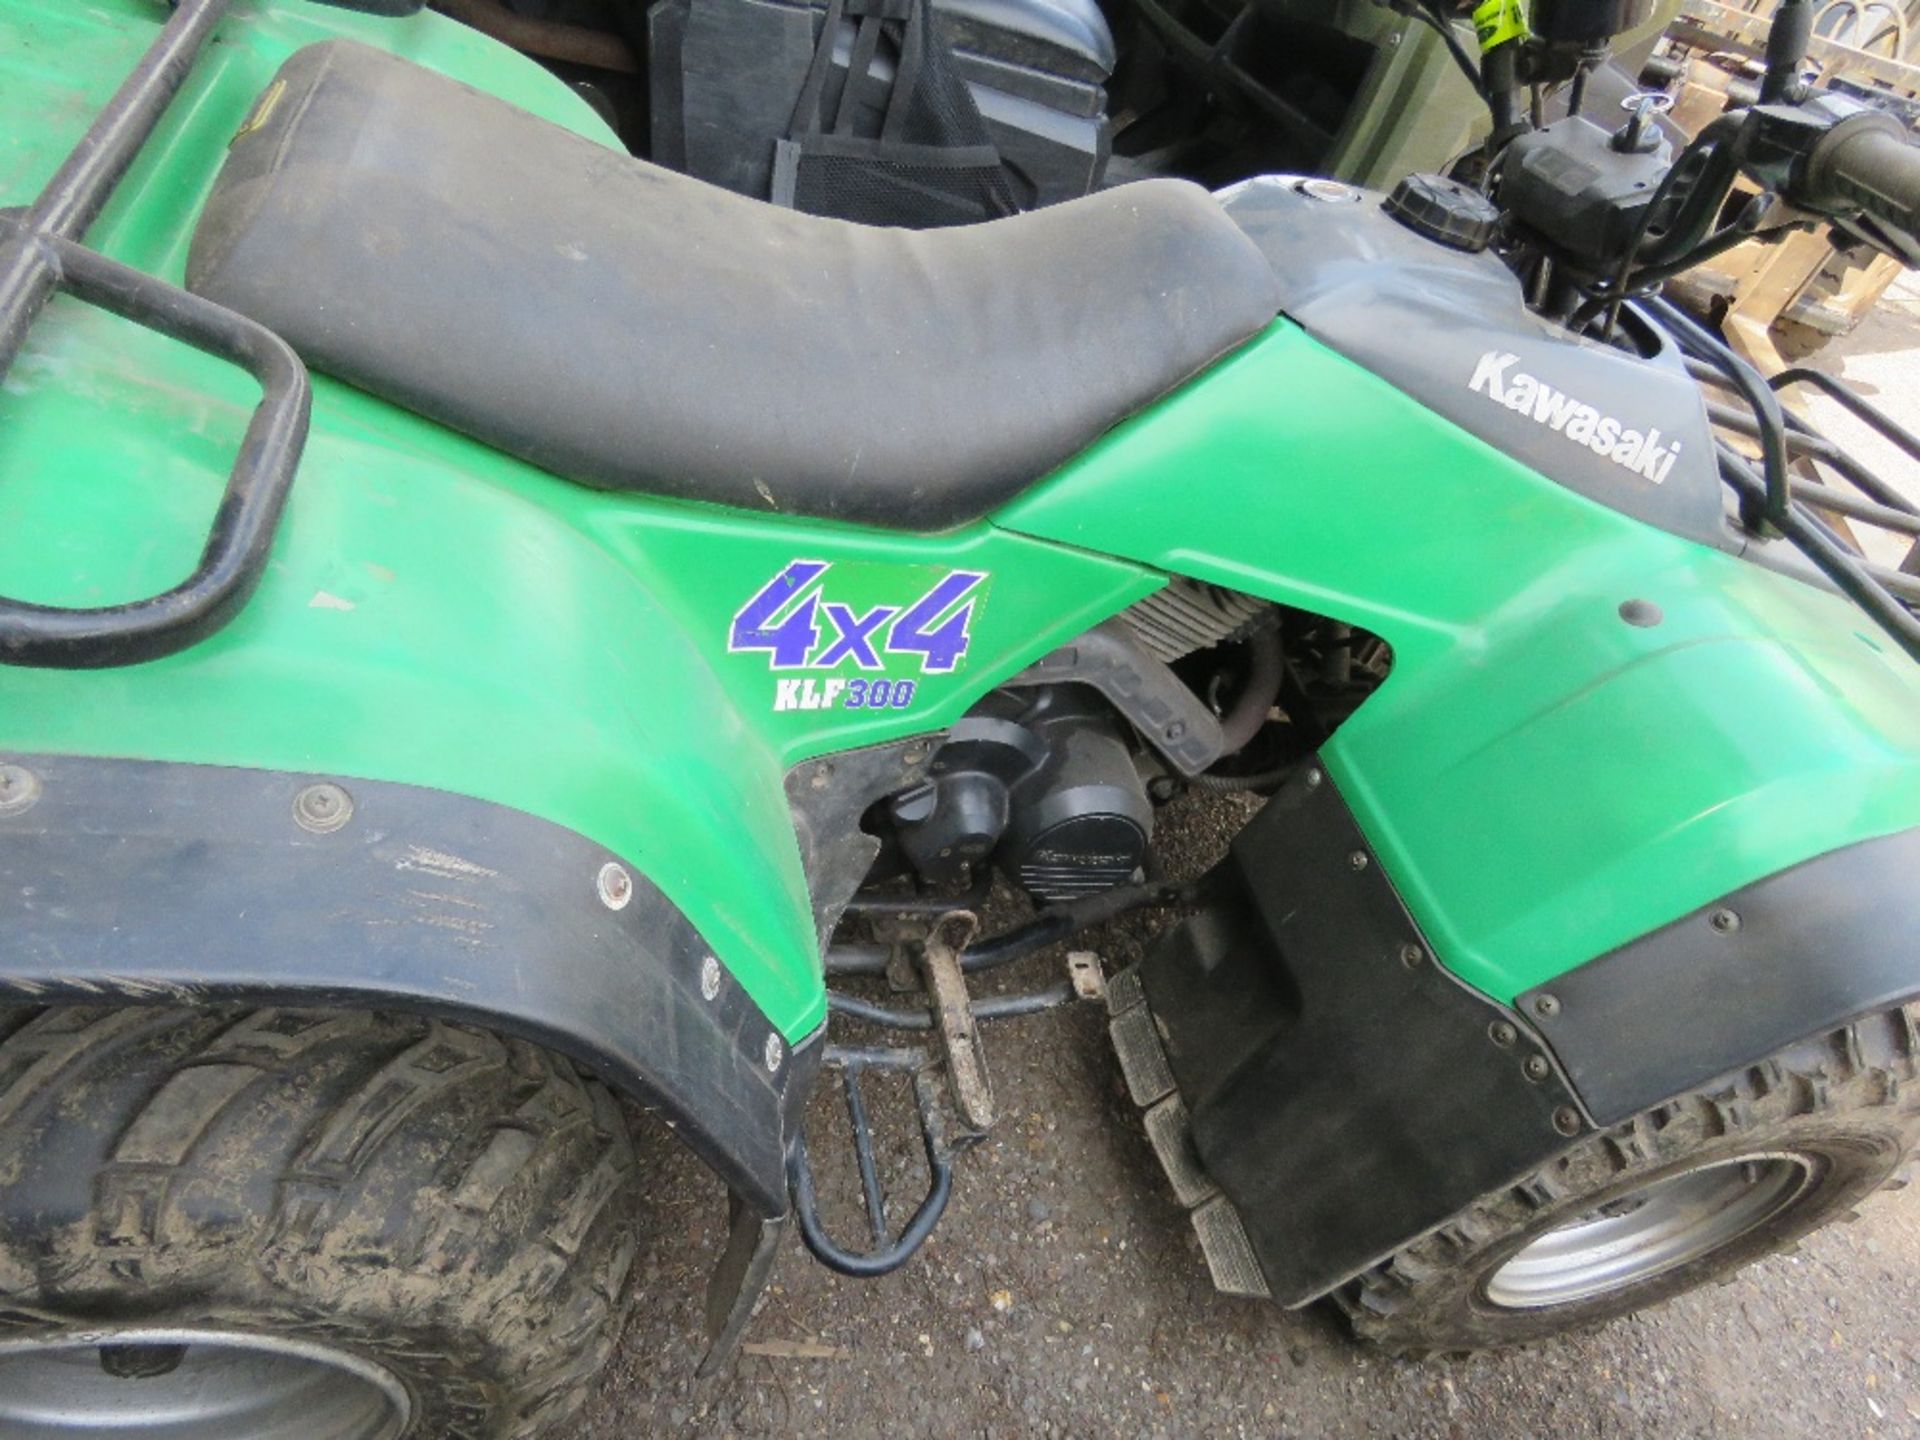 KAWASAKI KLF300 4X4 4WD PETROL ENGINED QUAD BIKE, TURNS OVER BUT NOT STARTING, CONDITION UNKNOWN, SO - Image 6 of 8